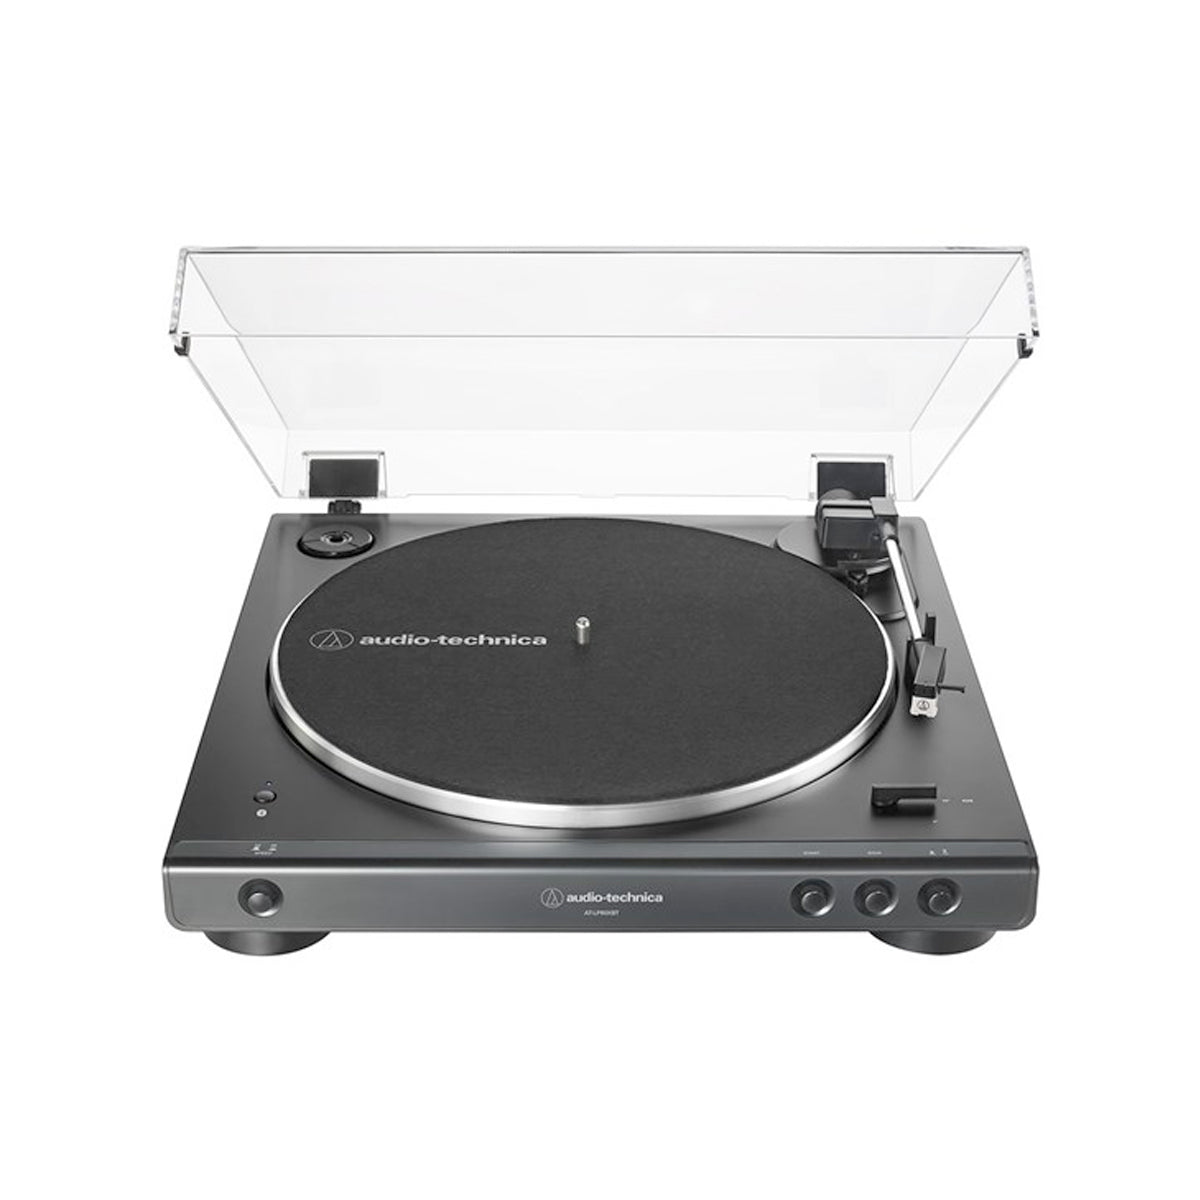 Audio Technica AT-LP60xBT Belt-Drive Turntable with preamp - Black - The Audio Experts